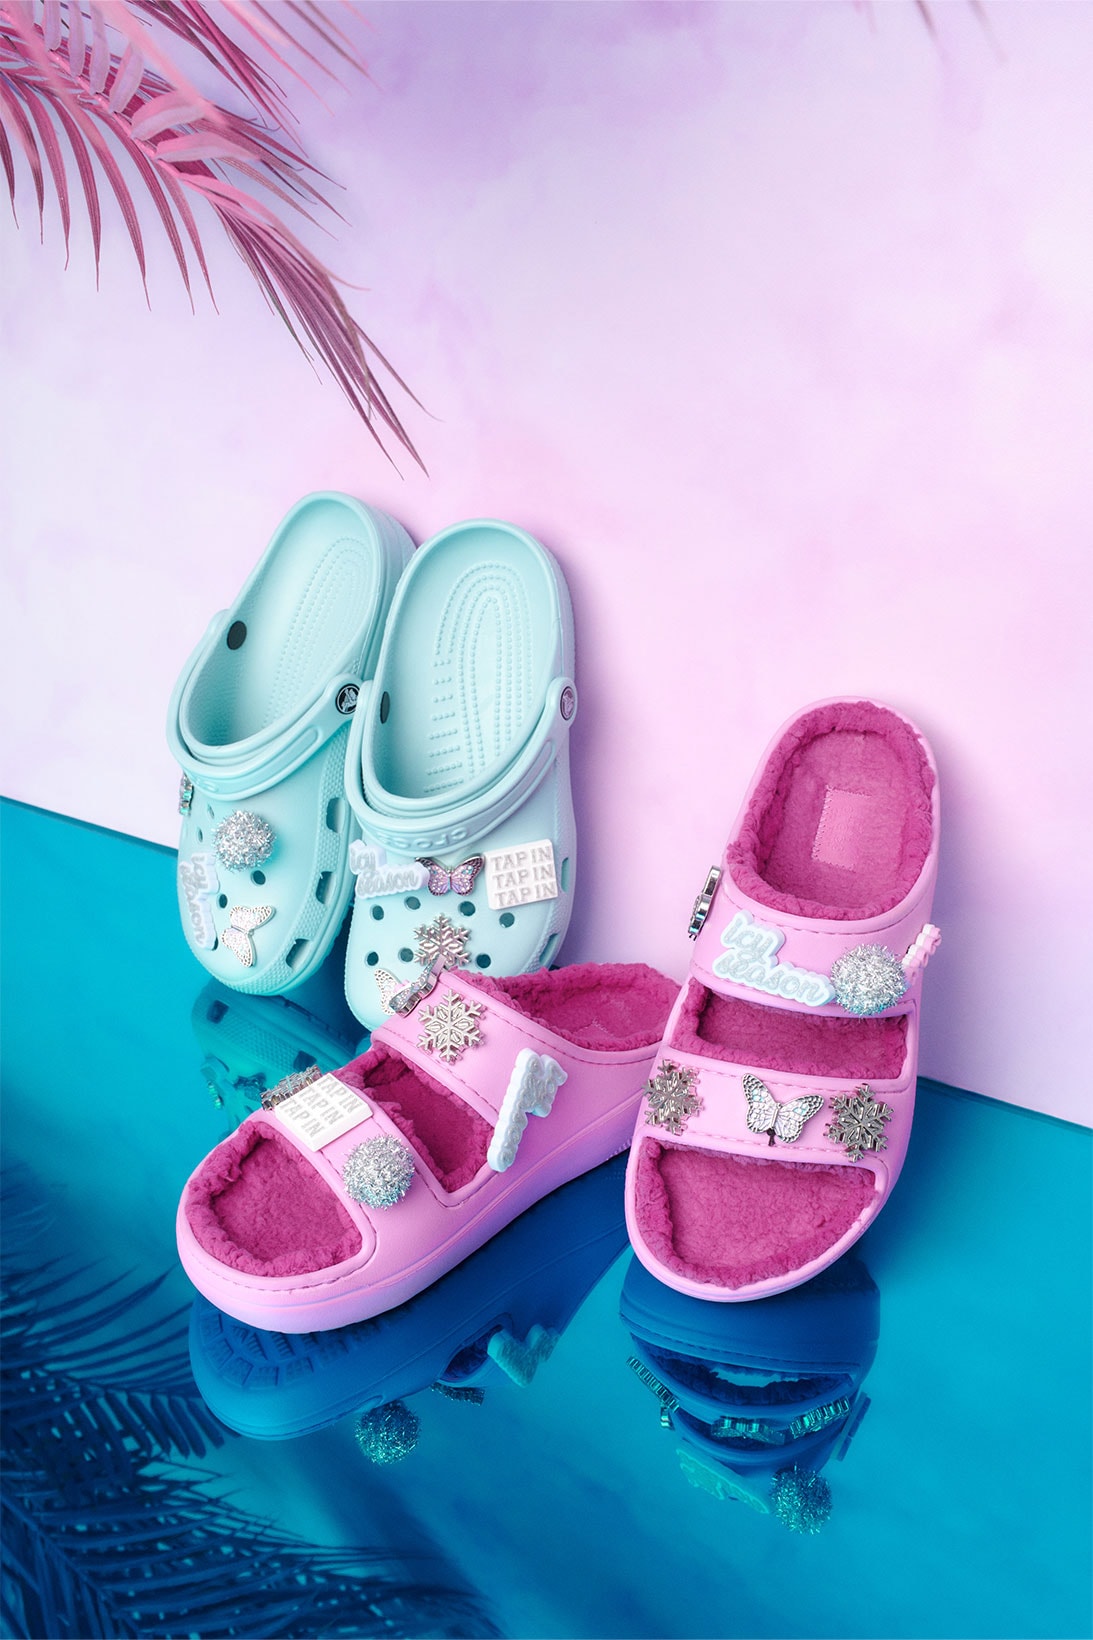 Saweetie Crocs Collaboration Jibbitz Classic Clogs Cozzzy Sandals Release Price Where to buy